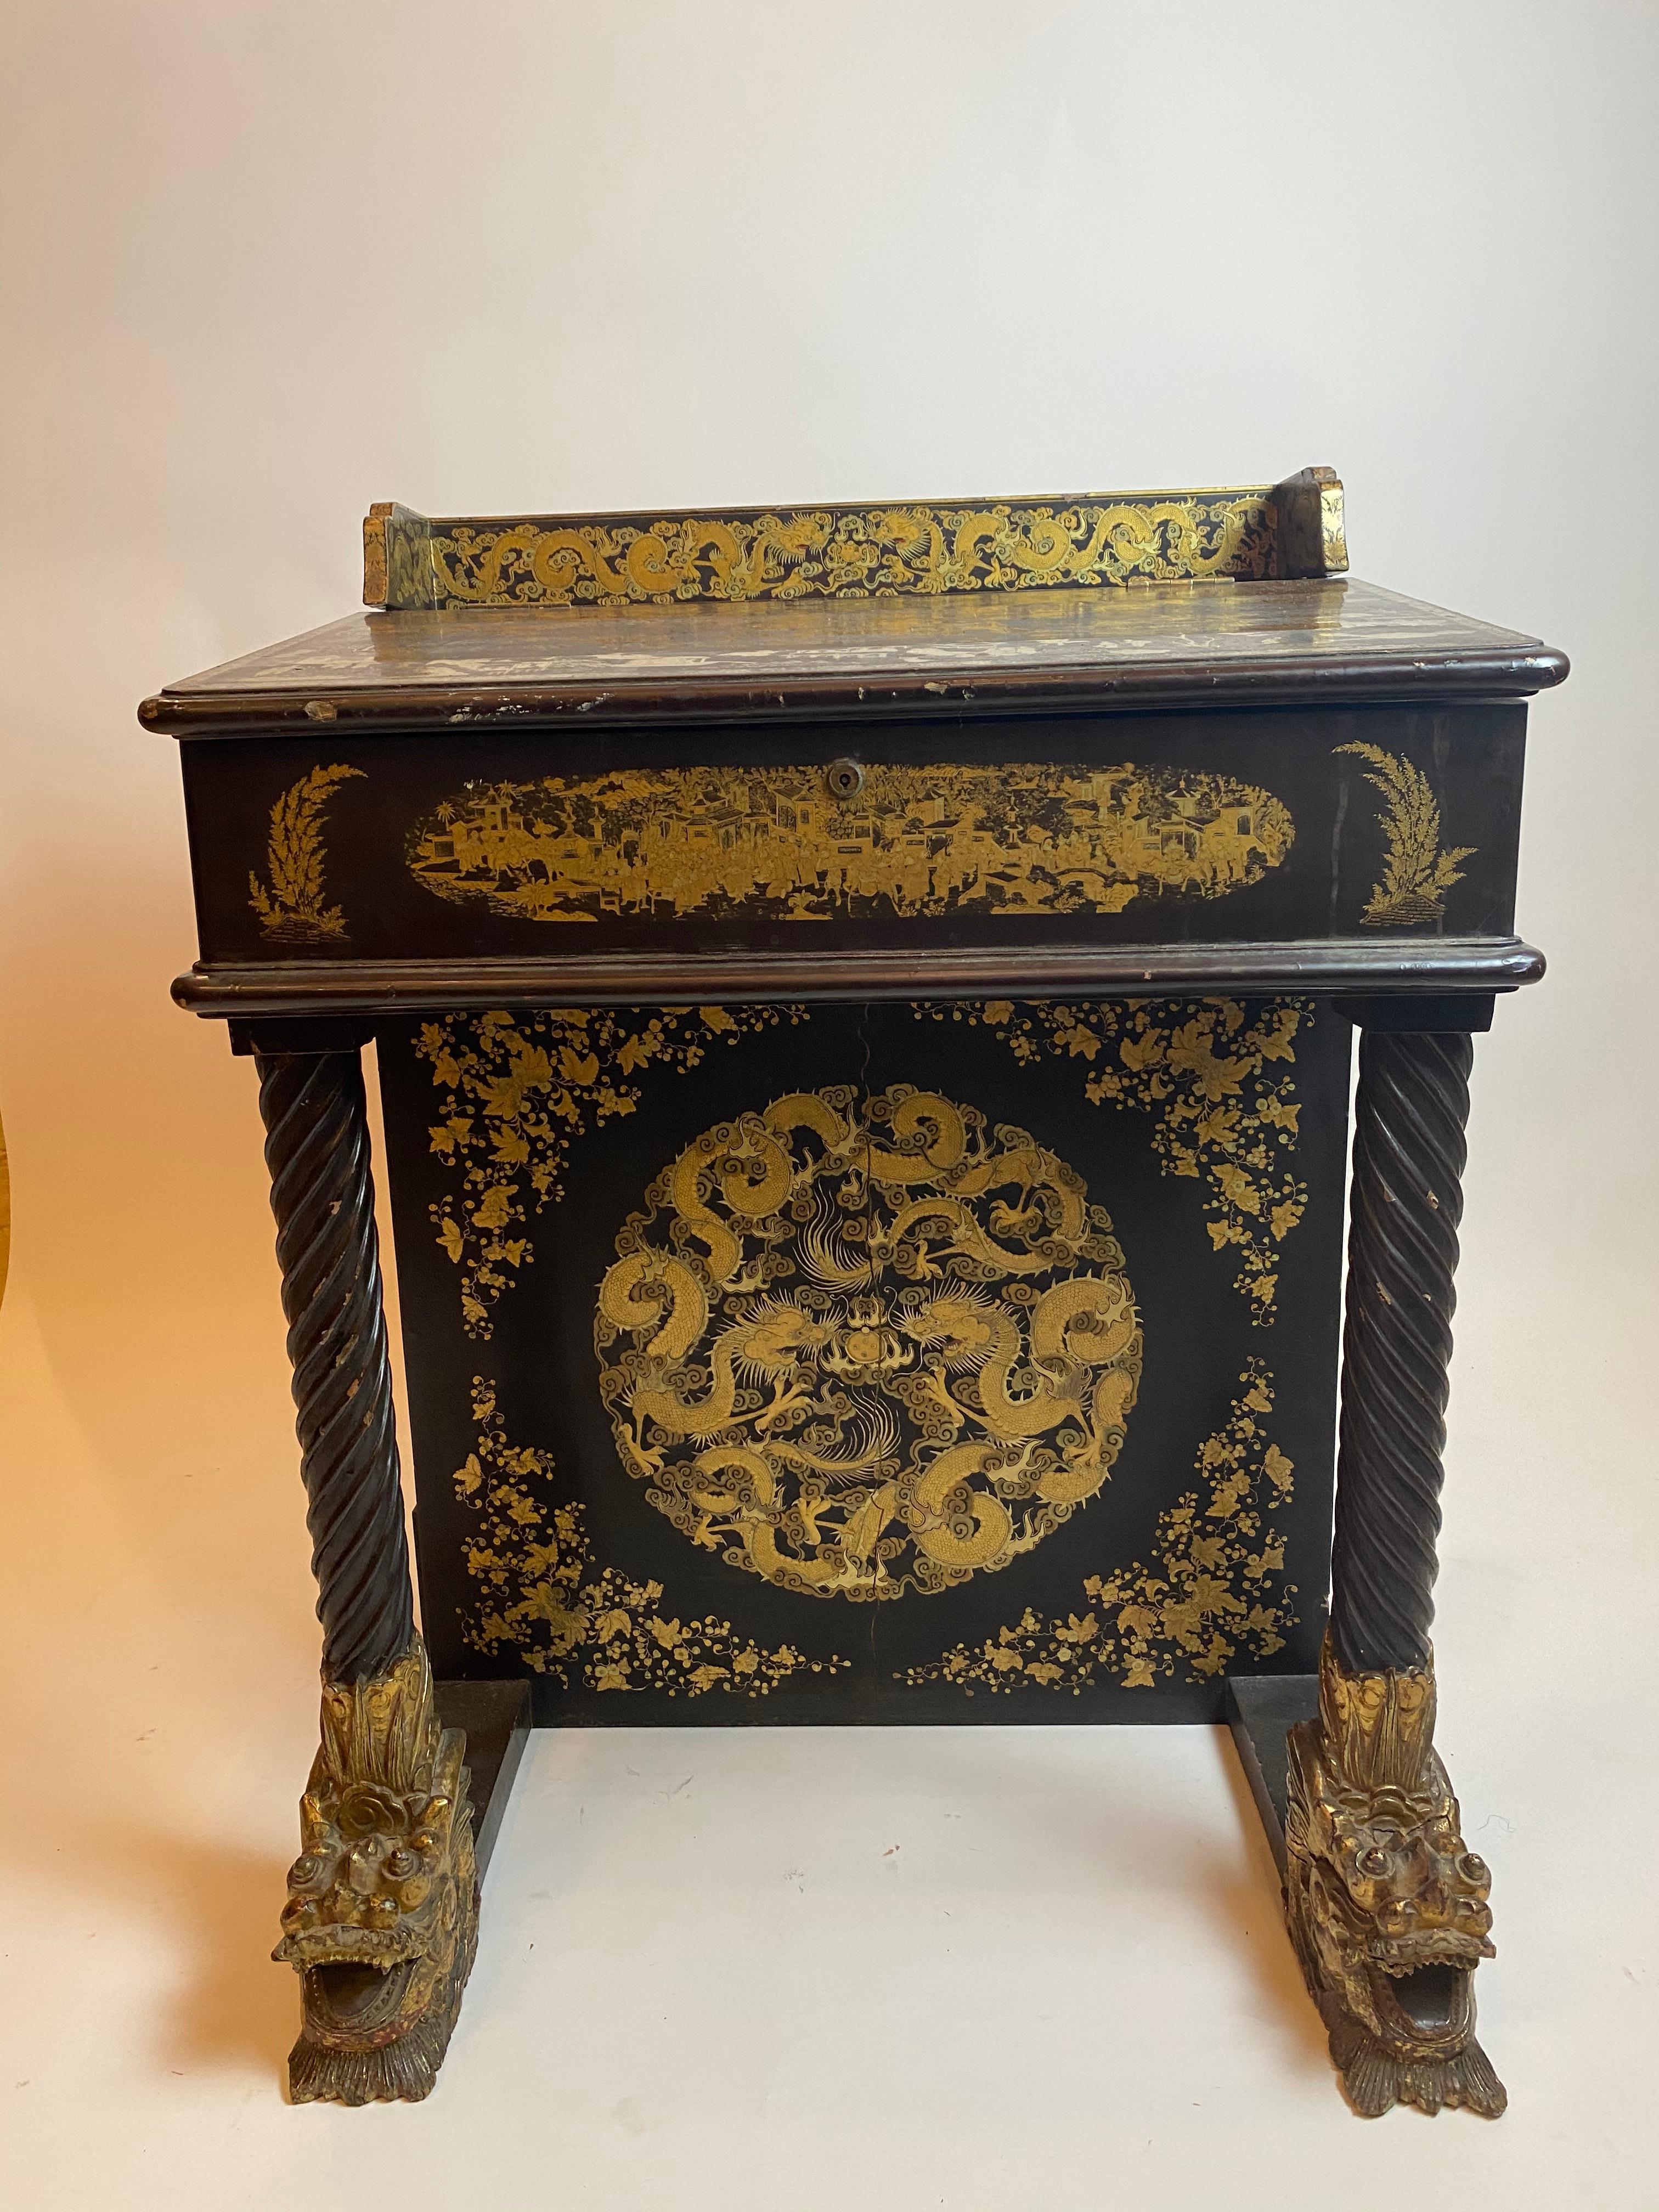 Early 19th century Chinese export lacquer and gilt Davenport desk, the entire finely decorated with the typical figural landscape and foliate gilt decoration, the sloped top opening to reveal a fitted interior with stationary divisions, above